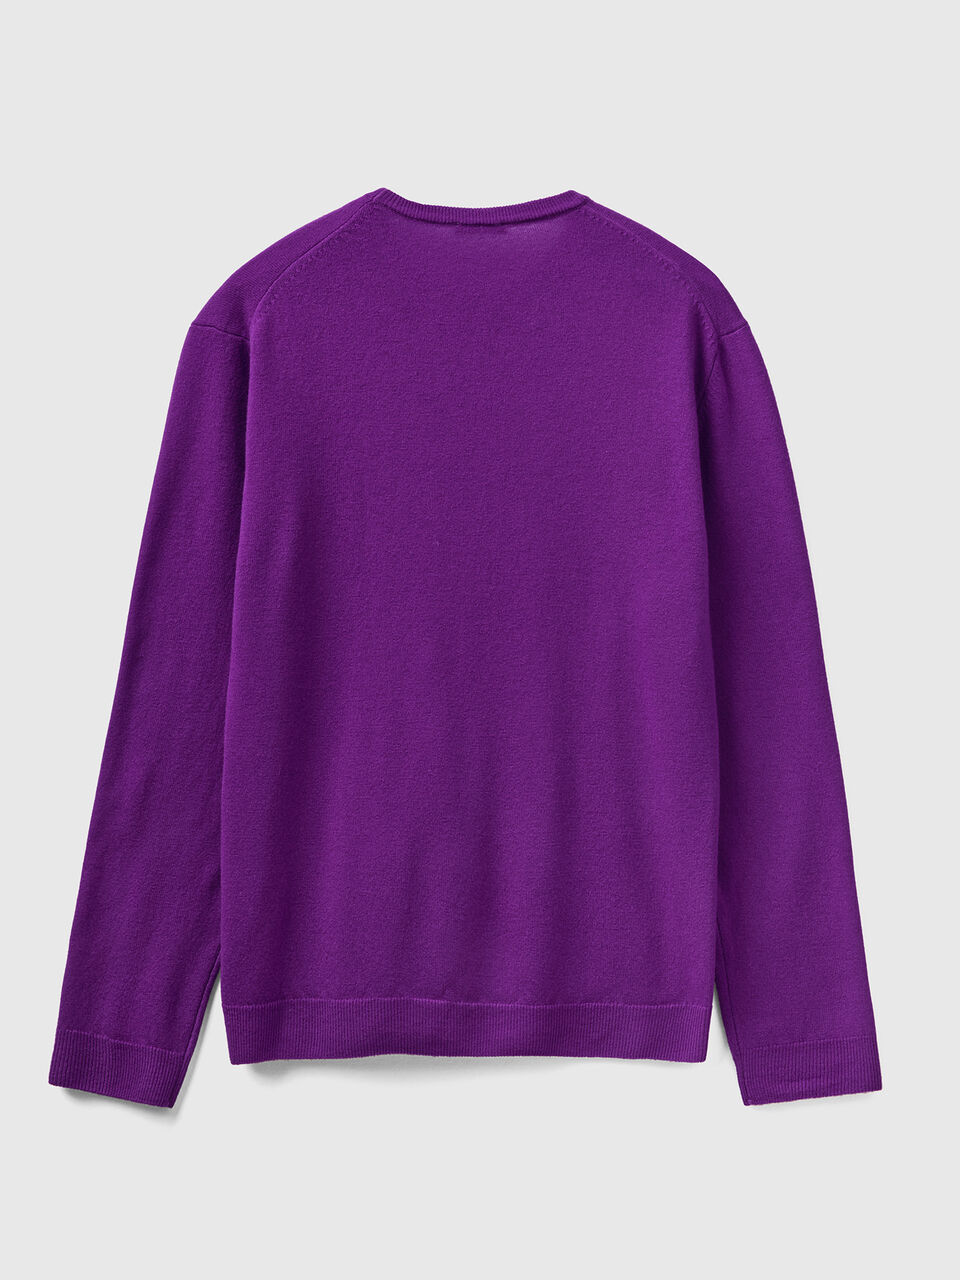 Renown Heavy Weight Crew Neck Pullover - Icy Purple